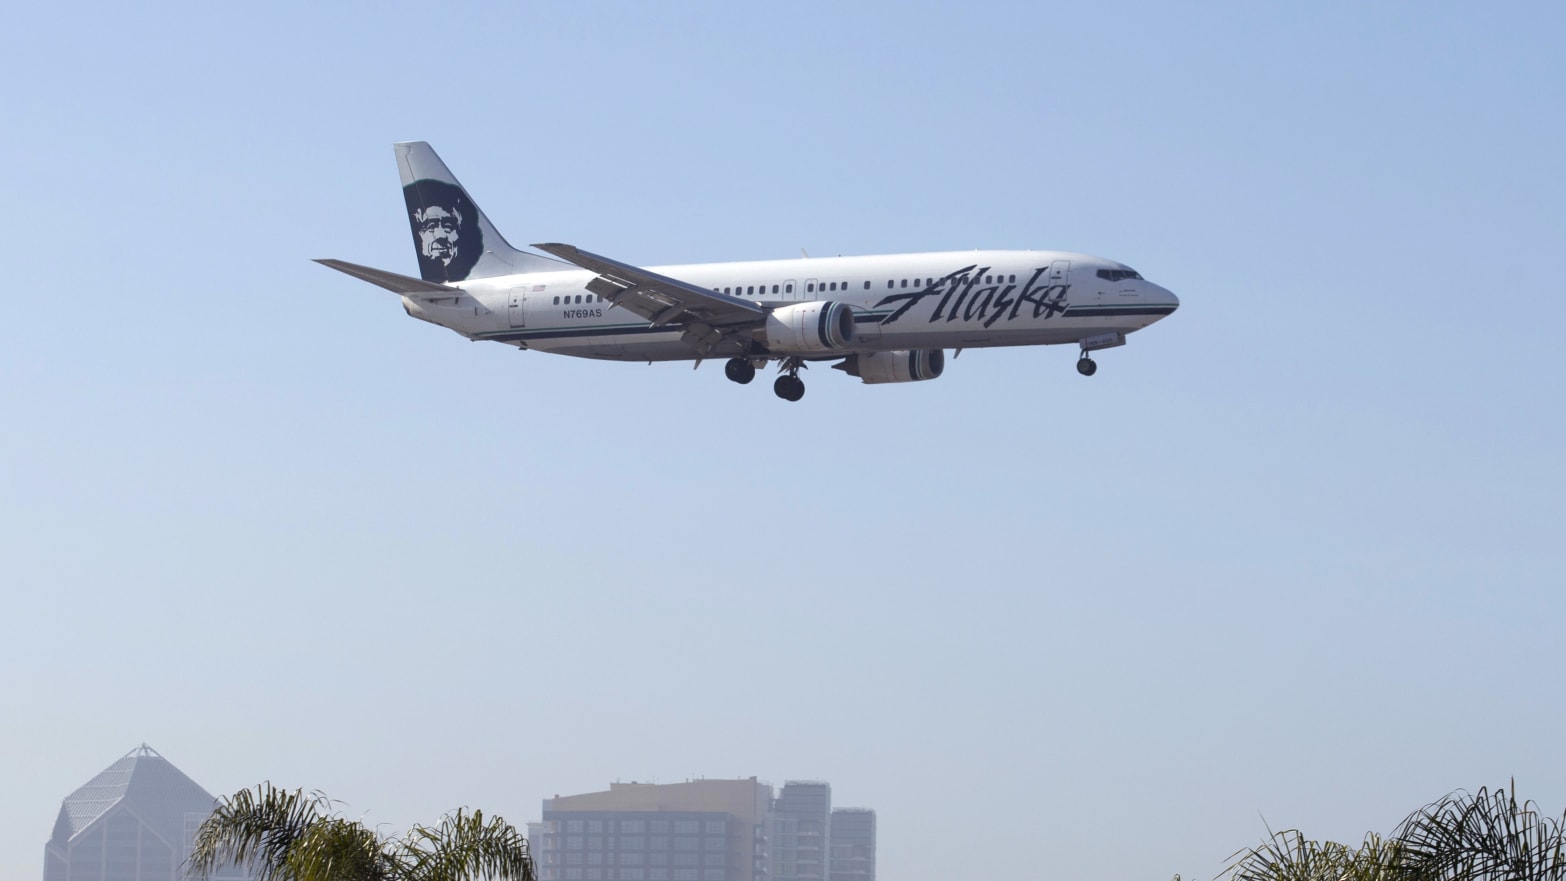 An Alaska Airlines Boeing 737-400 plane is shown on final approach to land in San Diego, California.